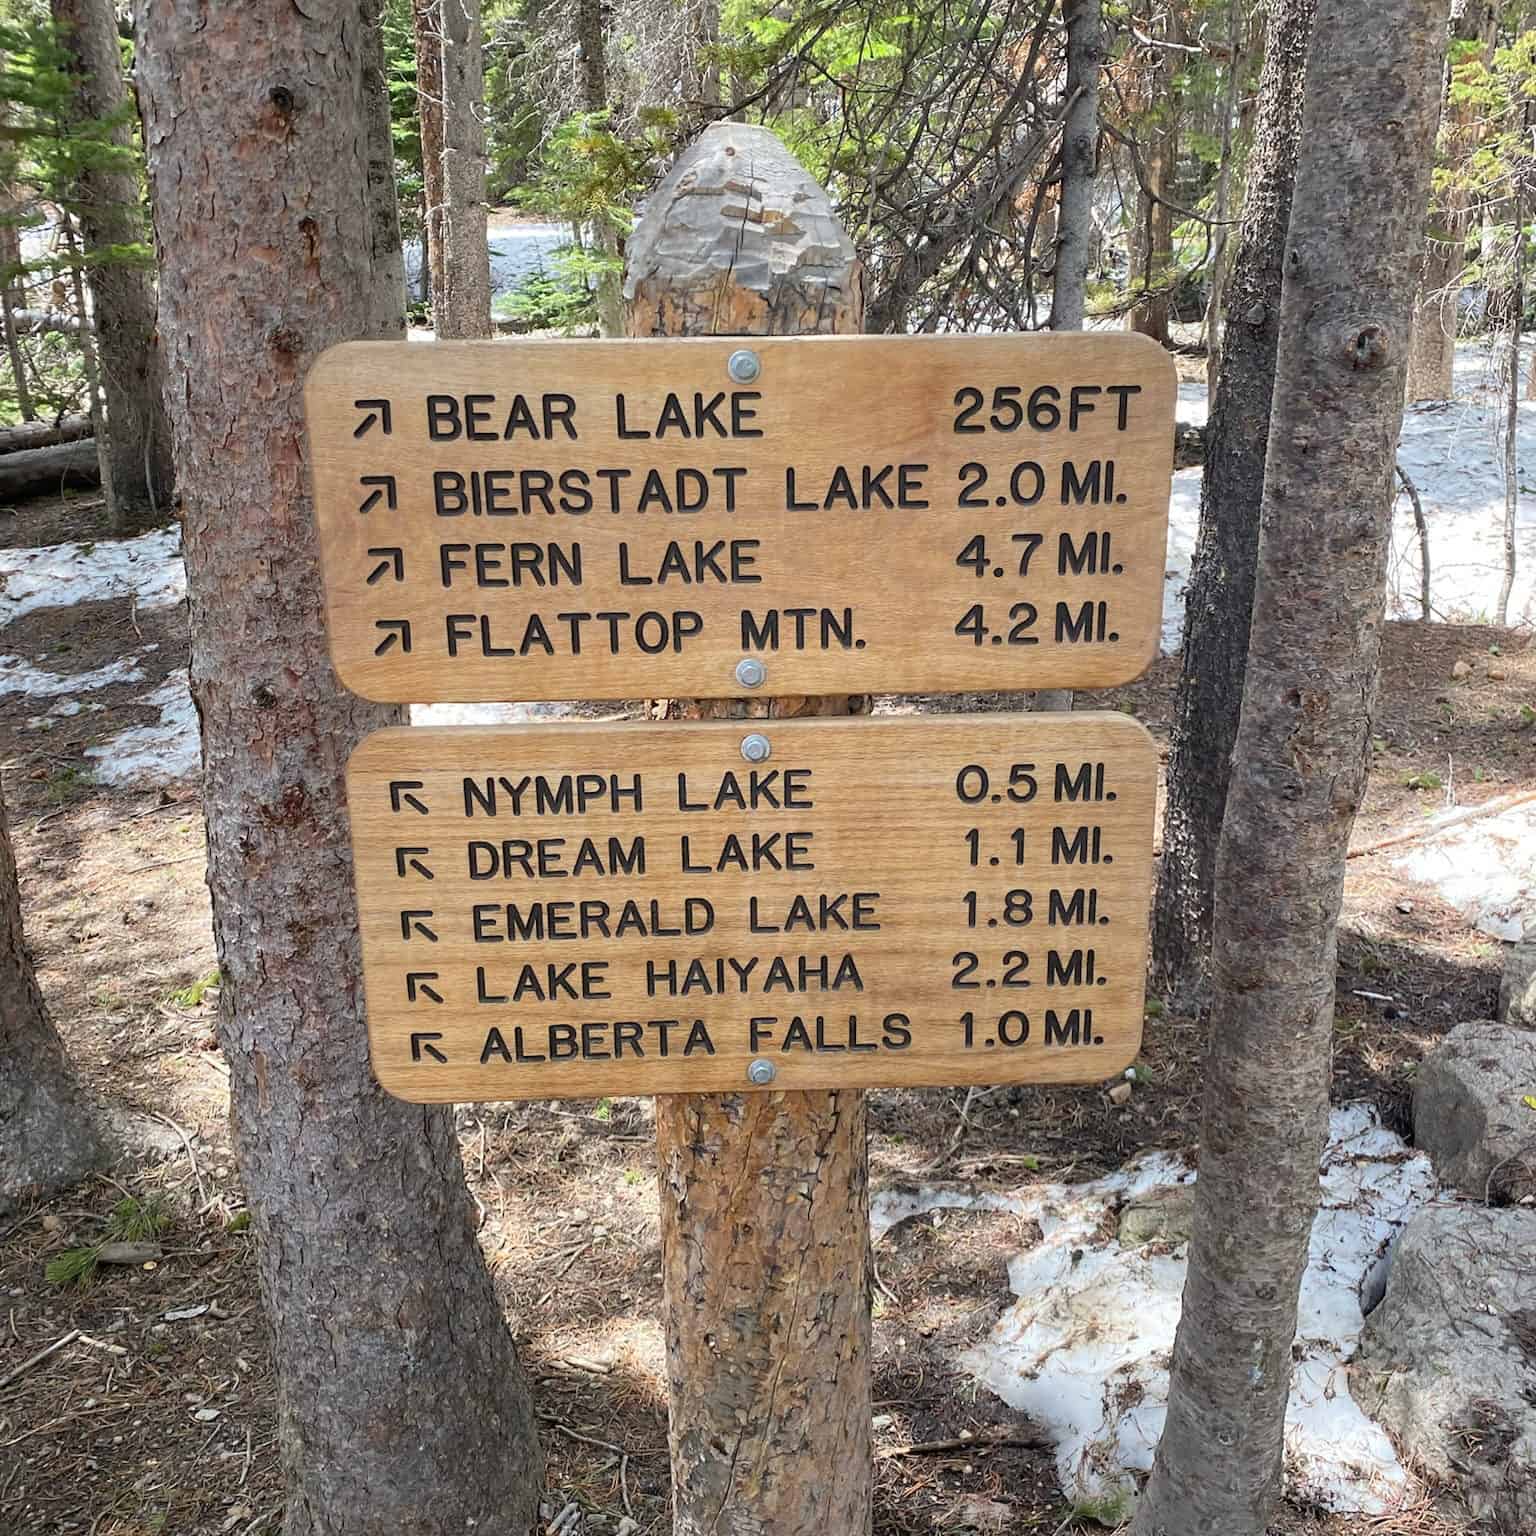 The different hikes to do in Rocky Mountain National Park in Estes Park Colorado. Listed on the sign amid trees and snow is: bear lake 256 ft, Bierstadt Lake 2.0 mi, Fern Lake 4.7 mi, Flattop Mtn. 4.2 mi, Nymph Lake 0.5 mi, Dream Lake 1.1 mi, Emerald Lake 1.8 mi, Lake Haiyaha 2.2 mi, Alberta Falls 1.0 mi